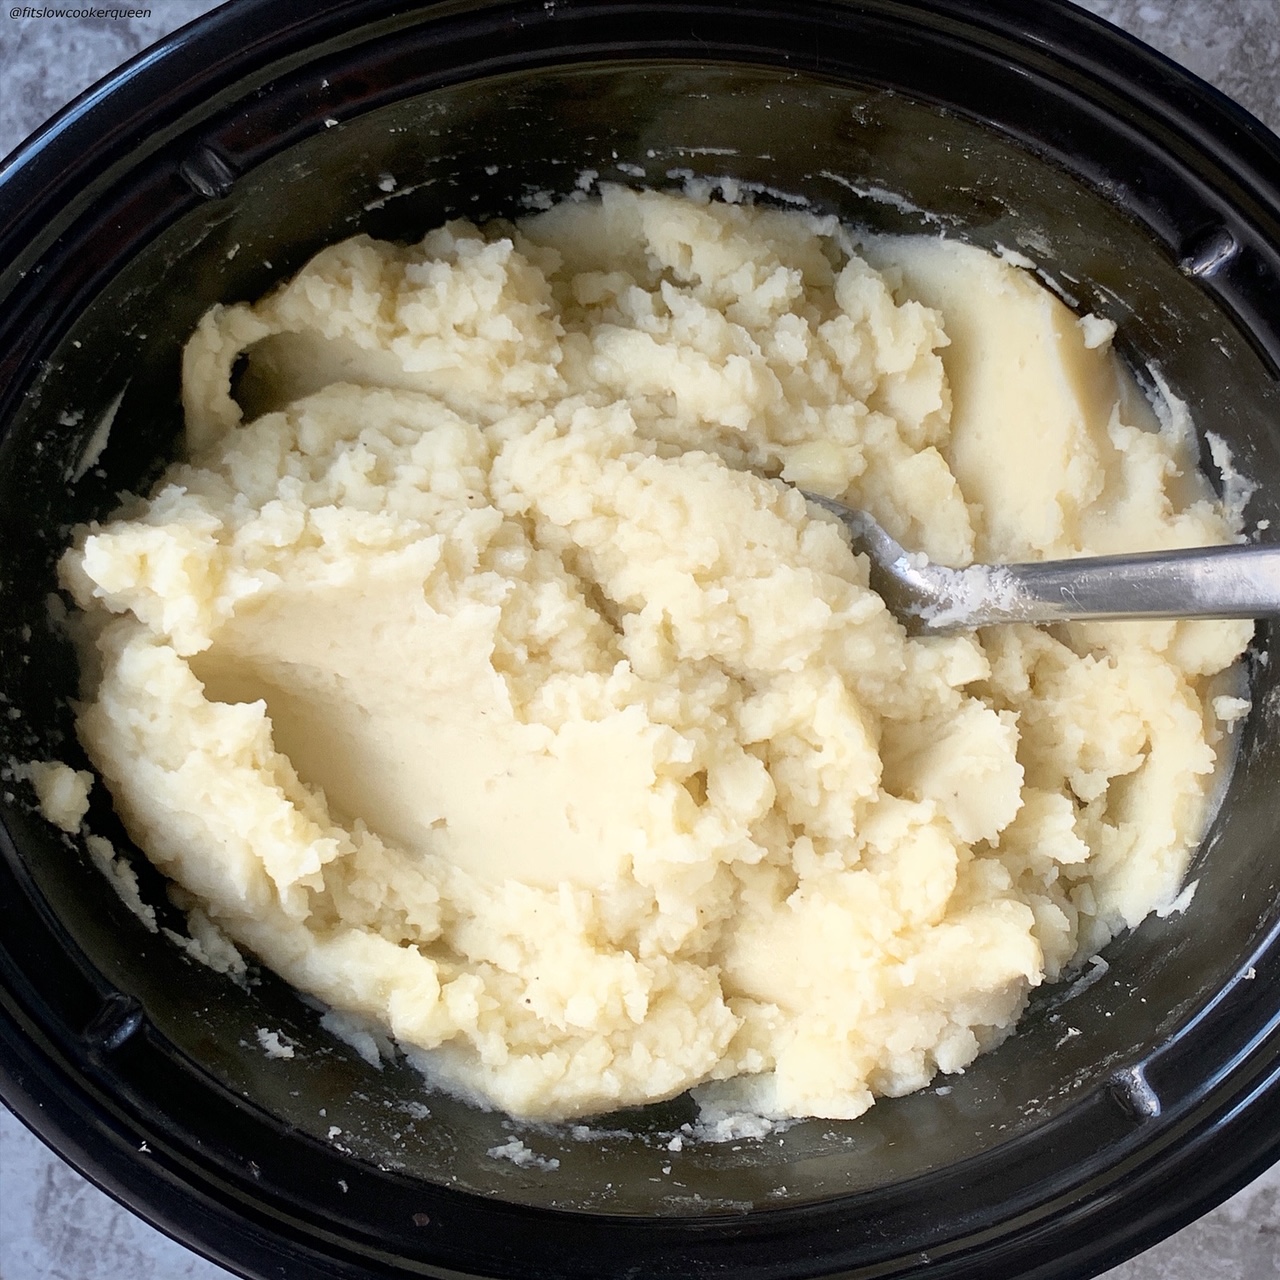 cooked potatoes in the slow cooker that have been mashed